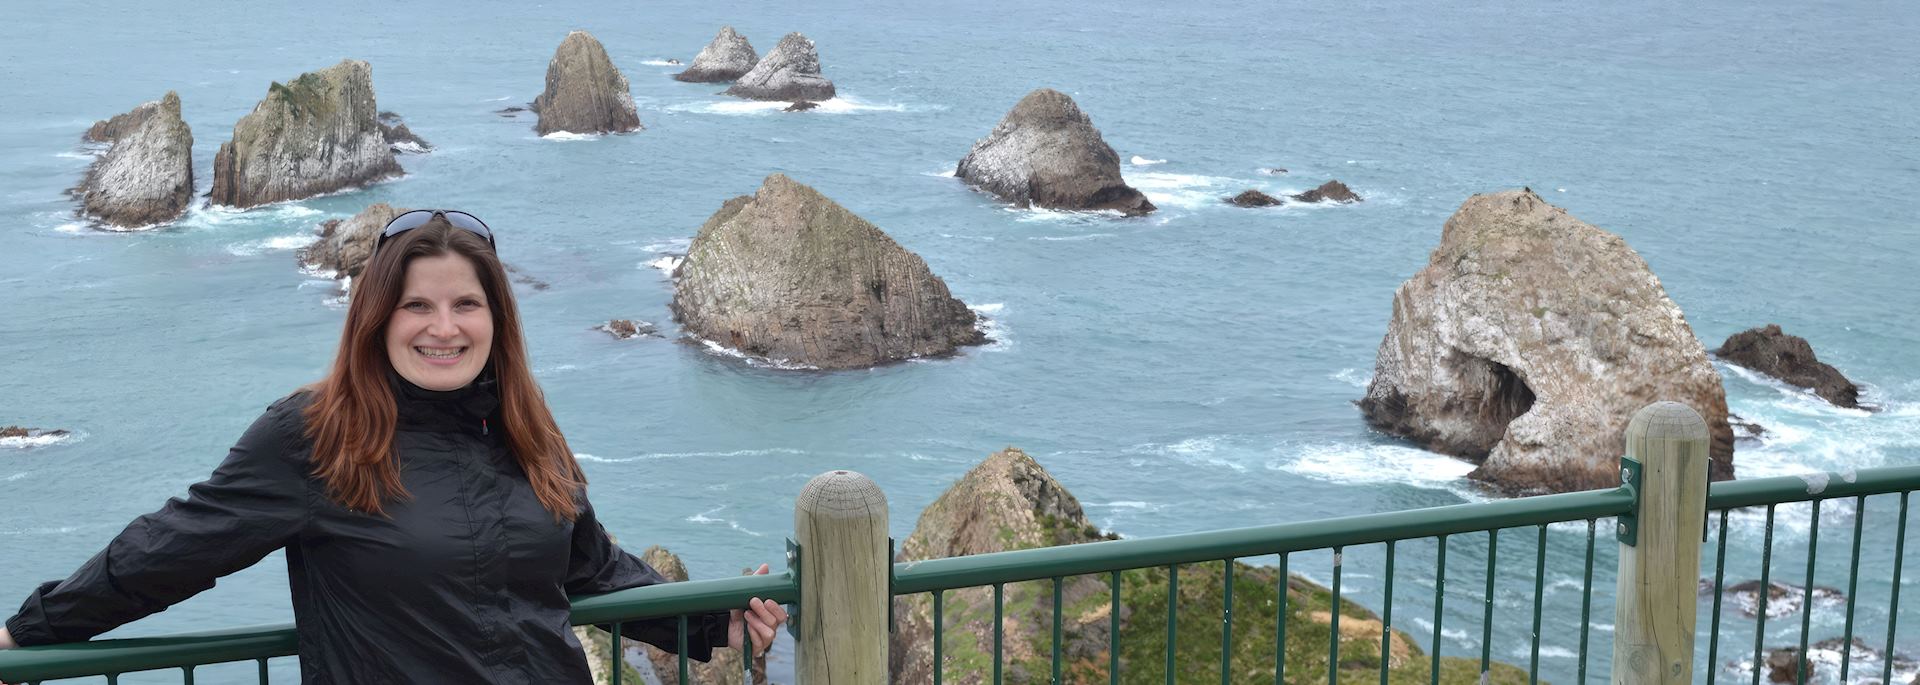 Barbara at Nugget Point on the Catlin Coast